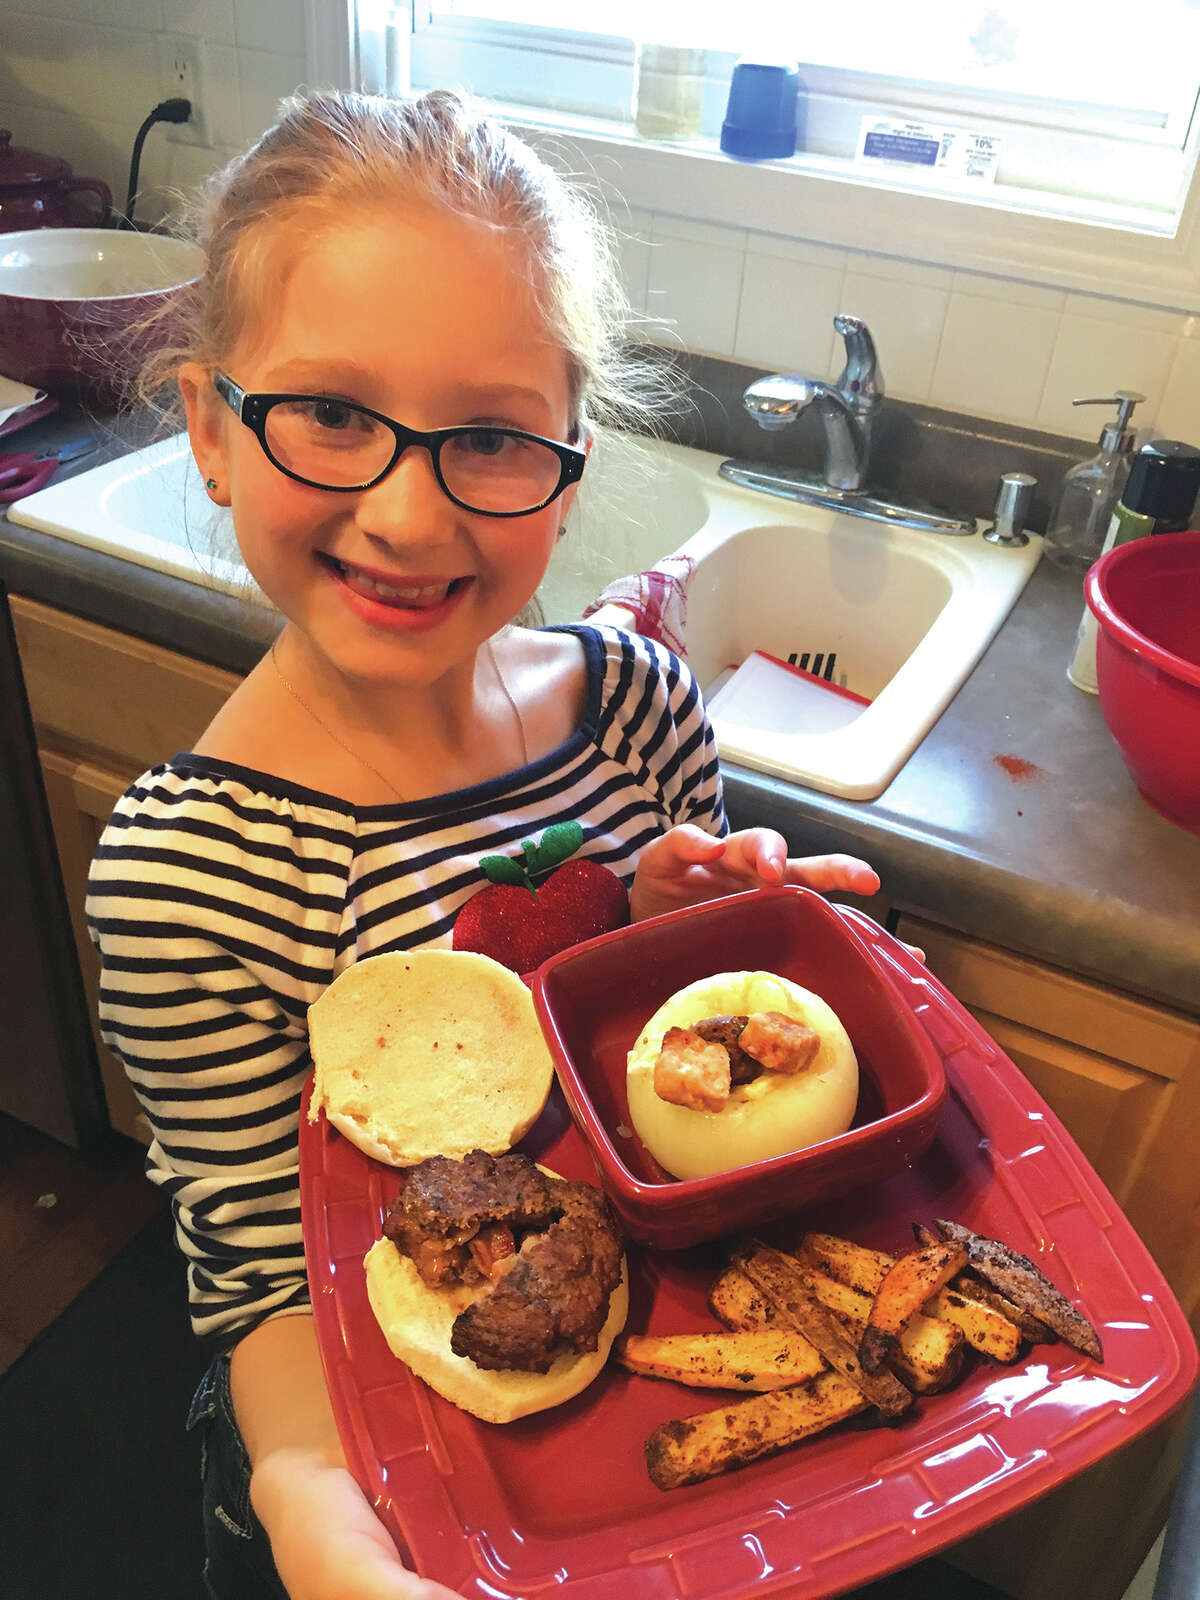 Ella Sedabres in her kitchen with some of her creations. She willl appear on the Food Network's Kids BBQ Championship Monday night.